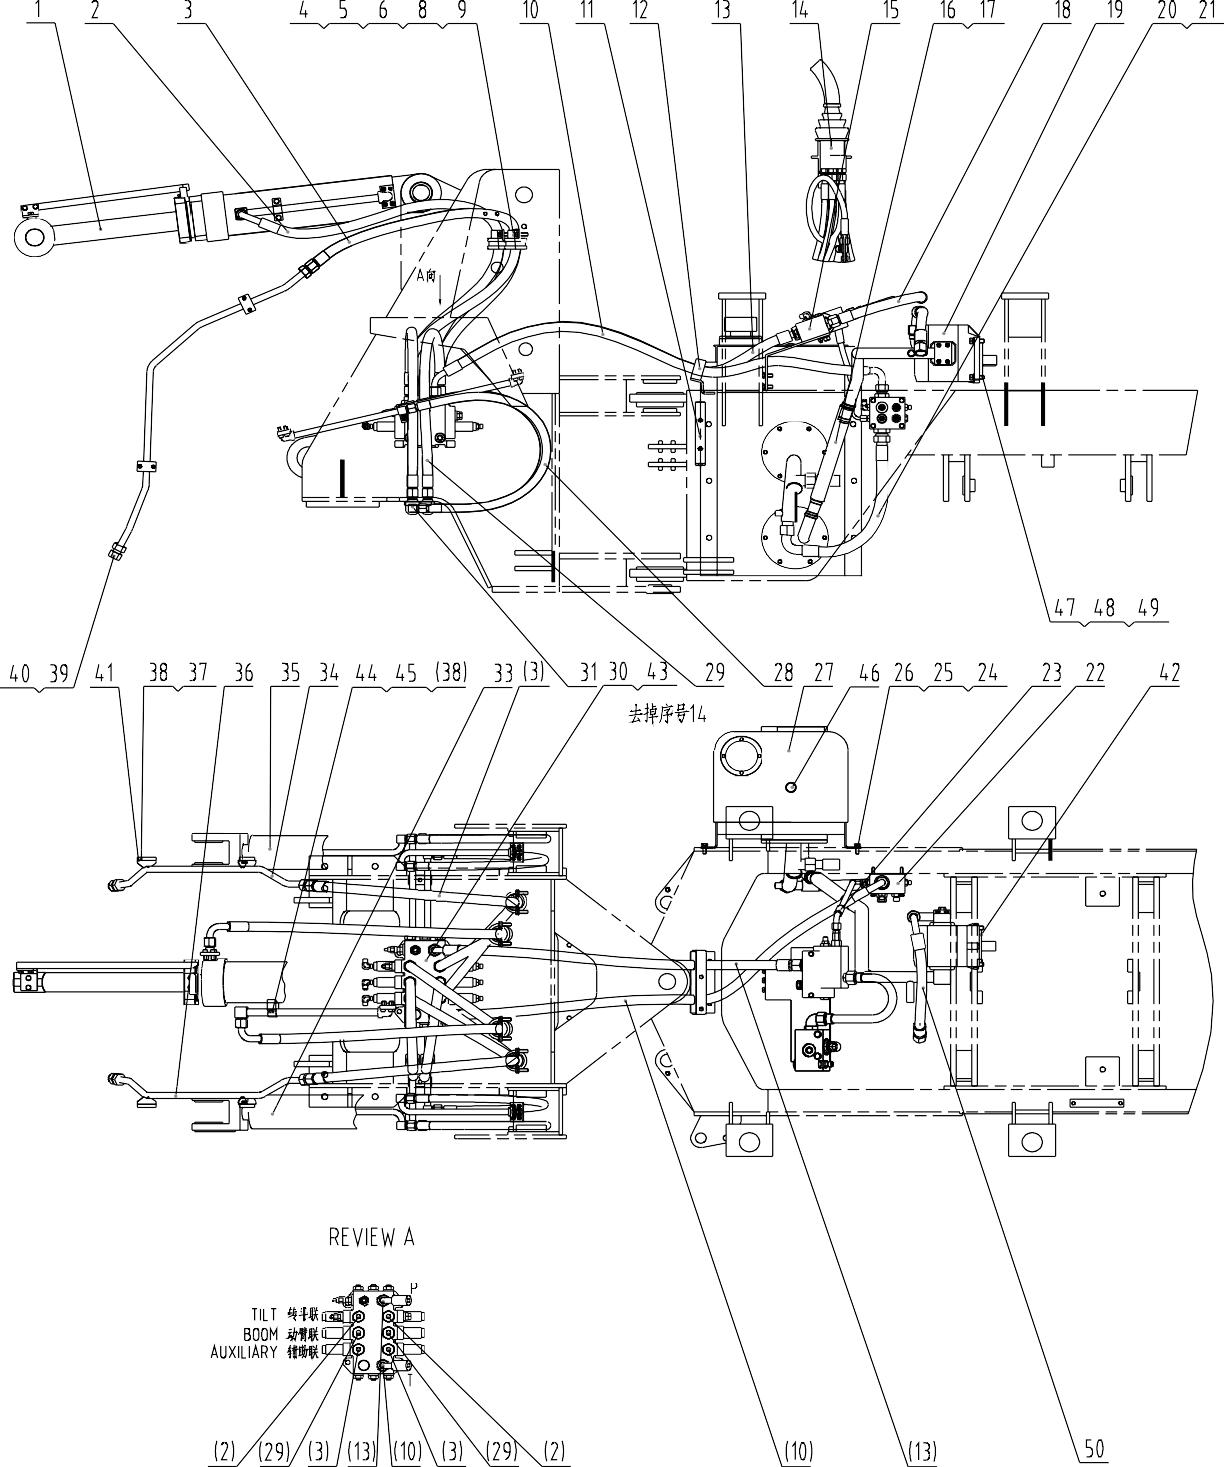 11E0371 009, HYDRAULIC SYSTEM, LIUGONG PARTS CATLOGUES